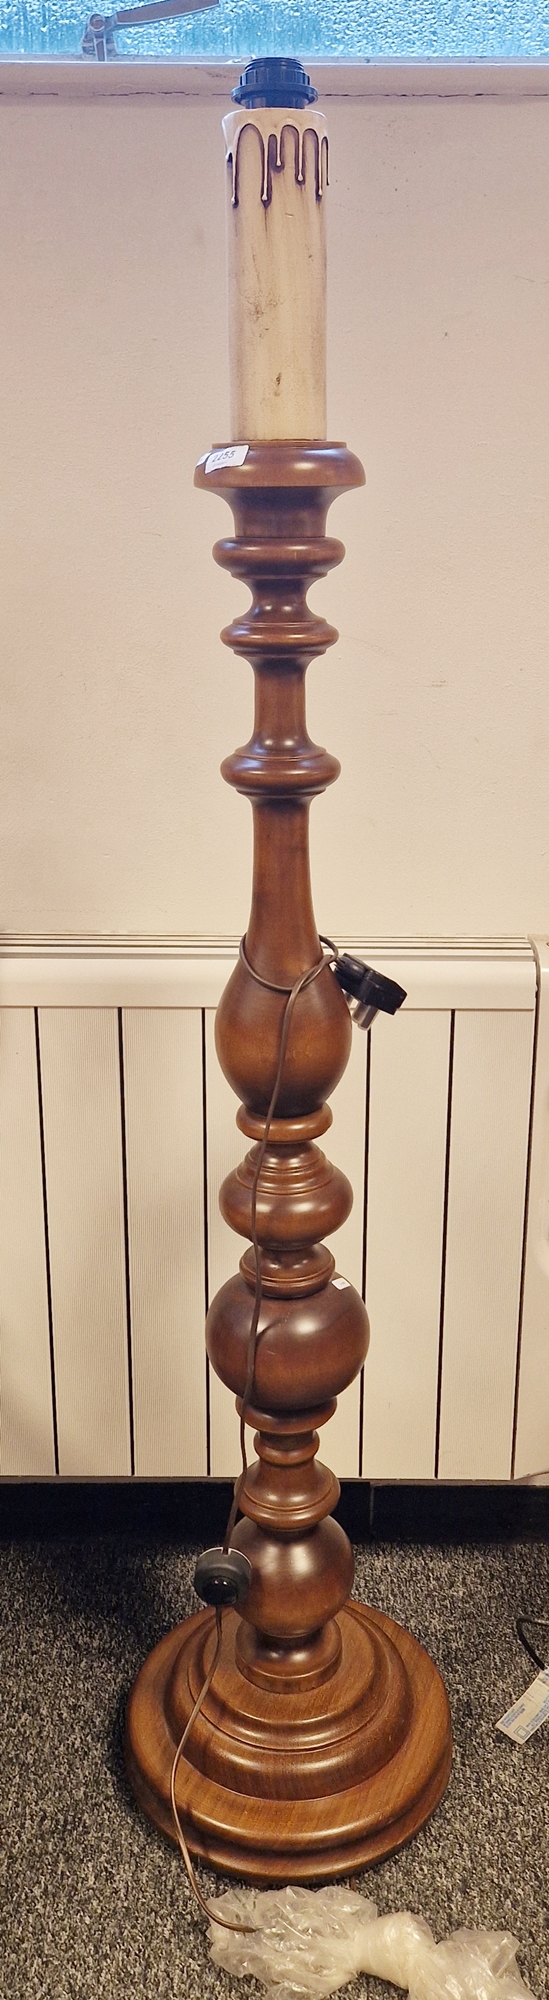 Contemporary Victorian-style wooden turned baluster standard lamp, with faux candlestick top, on